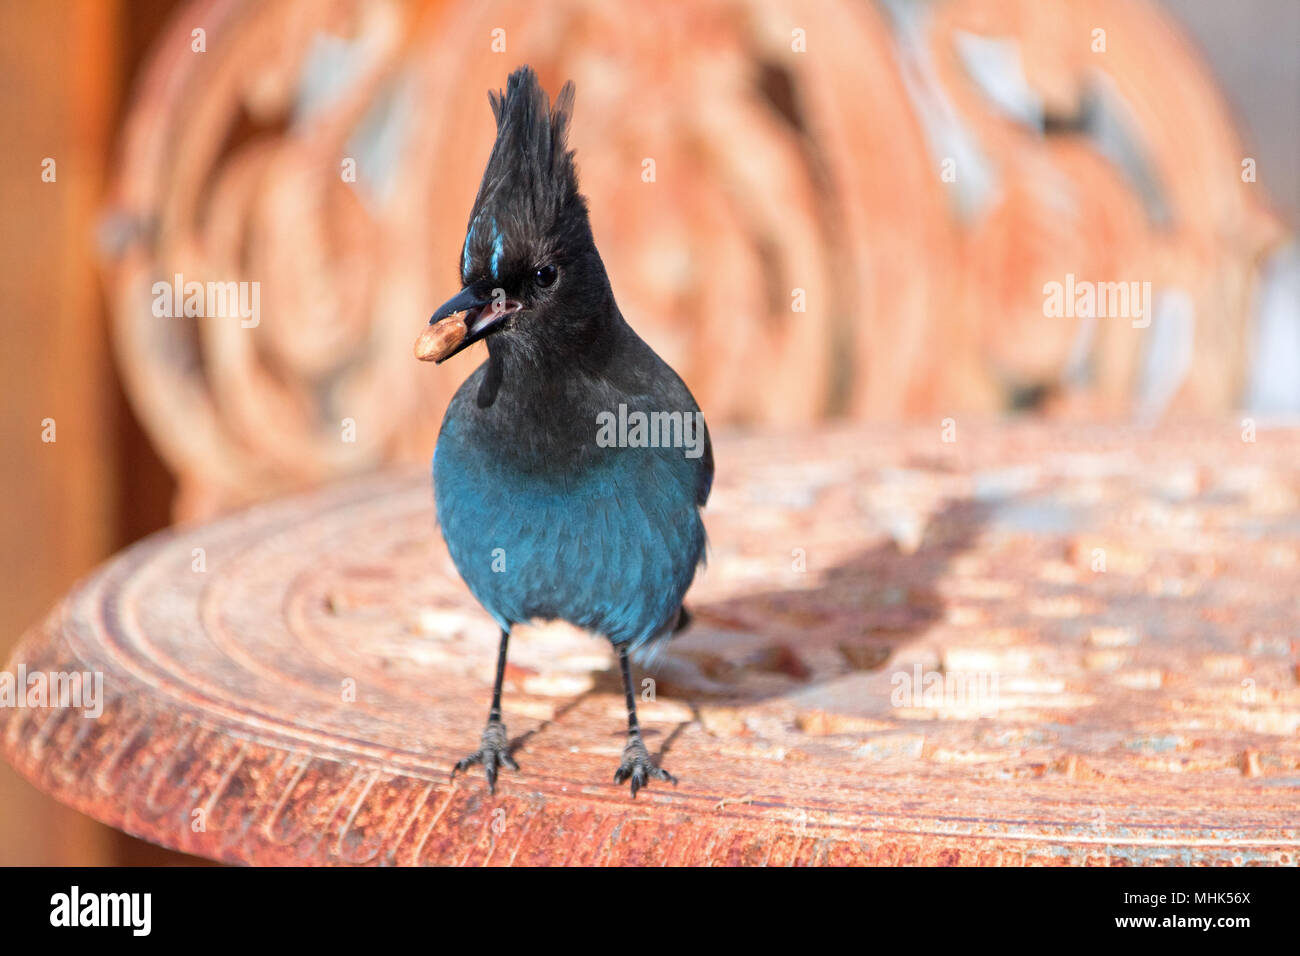 Stellar's Jay / Blue Jay with nut in beak on wrought iron table in Big Bear California United States Stock Photo